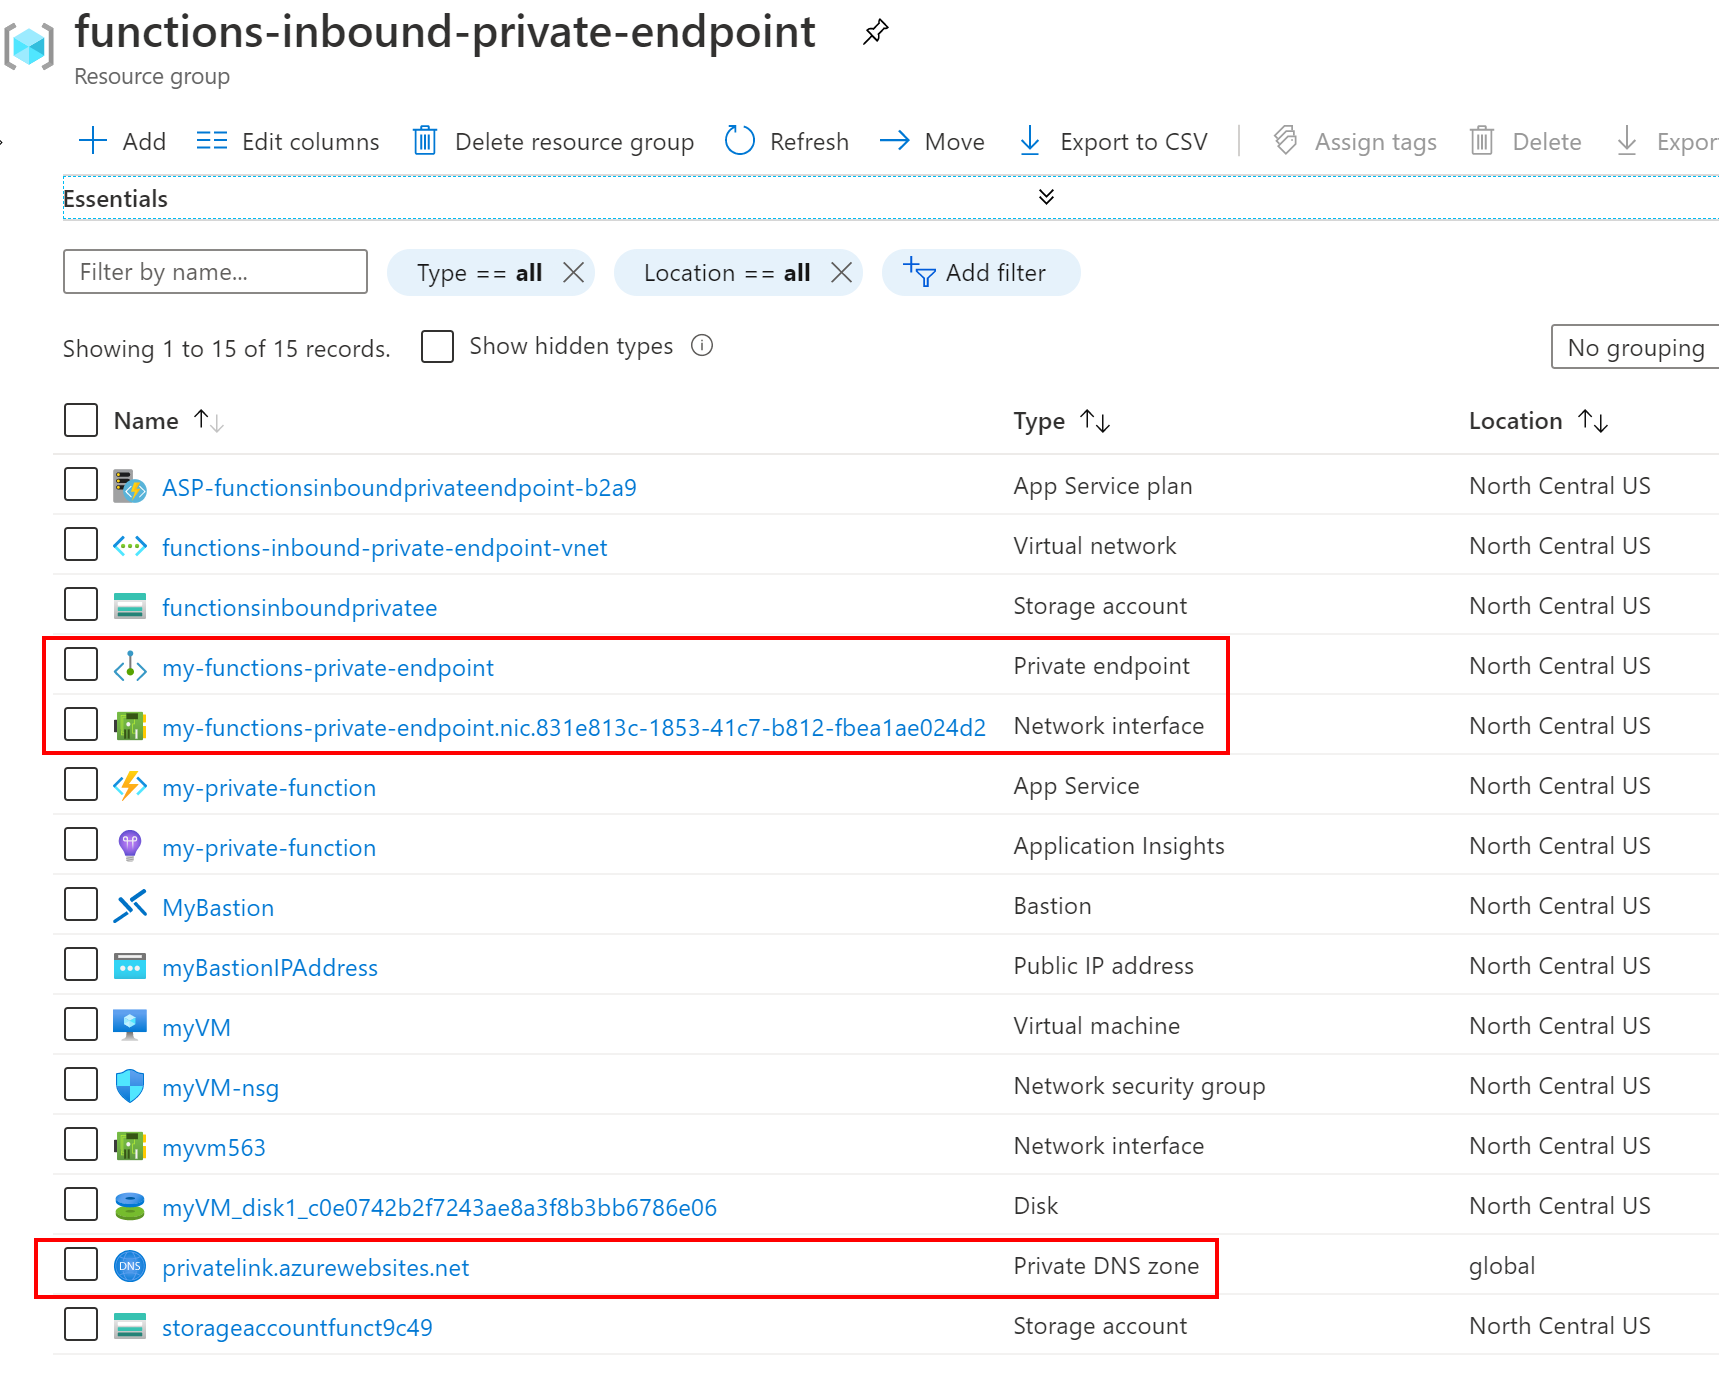 Resource group with private endpoint